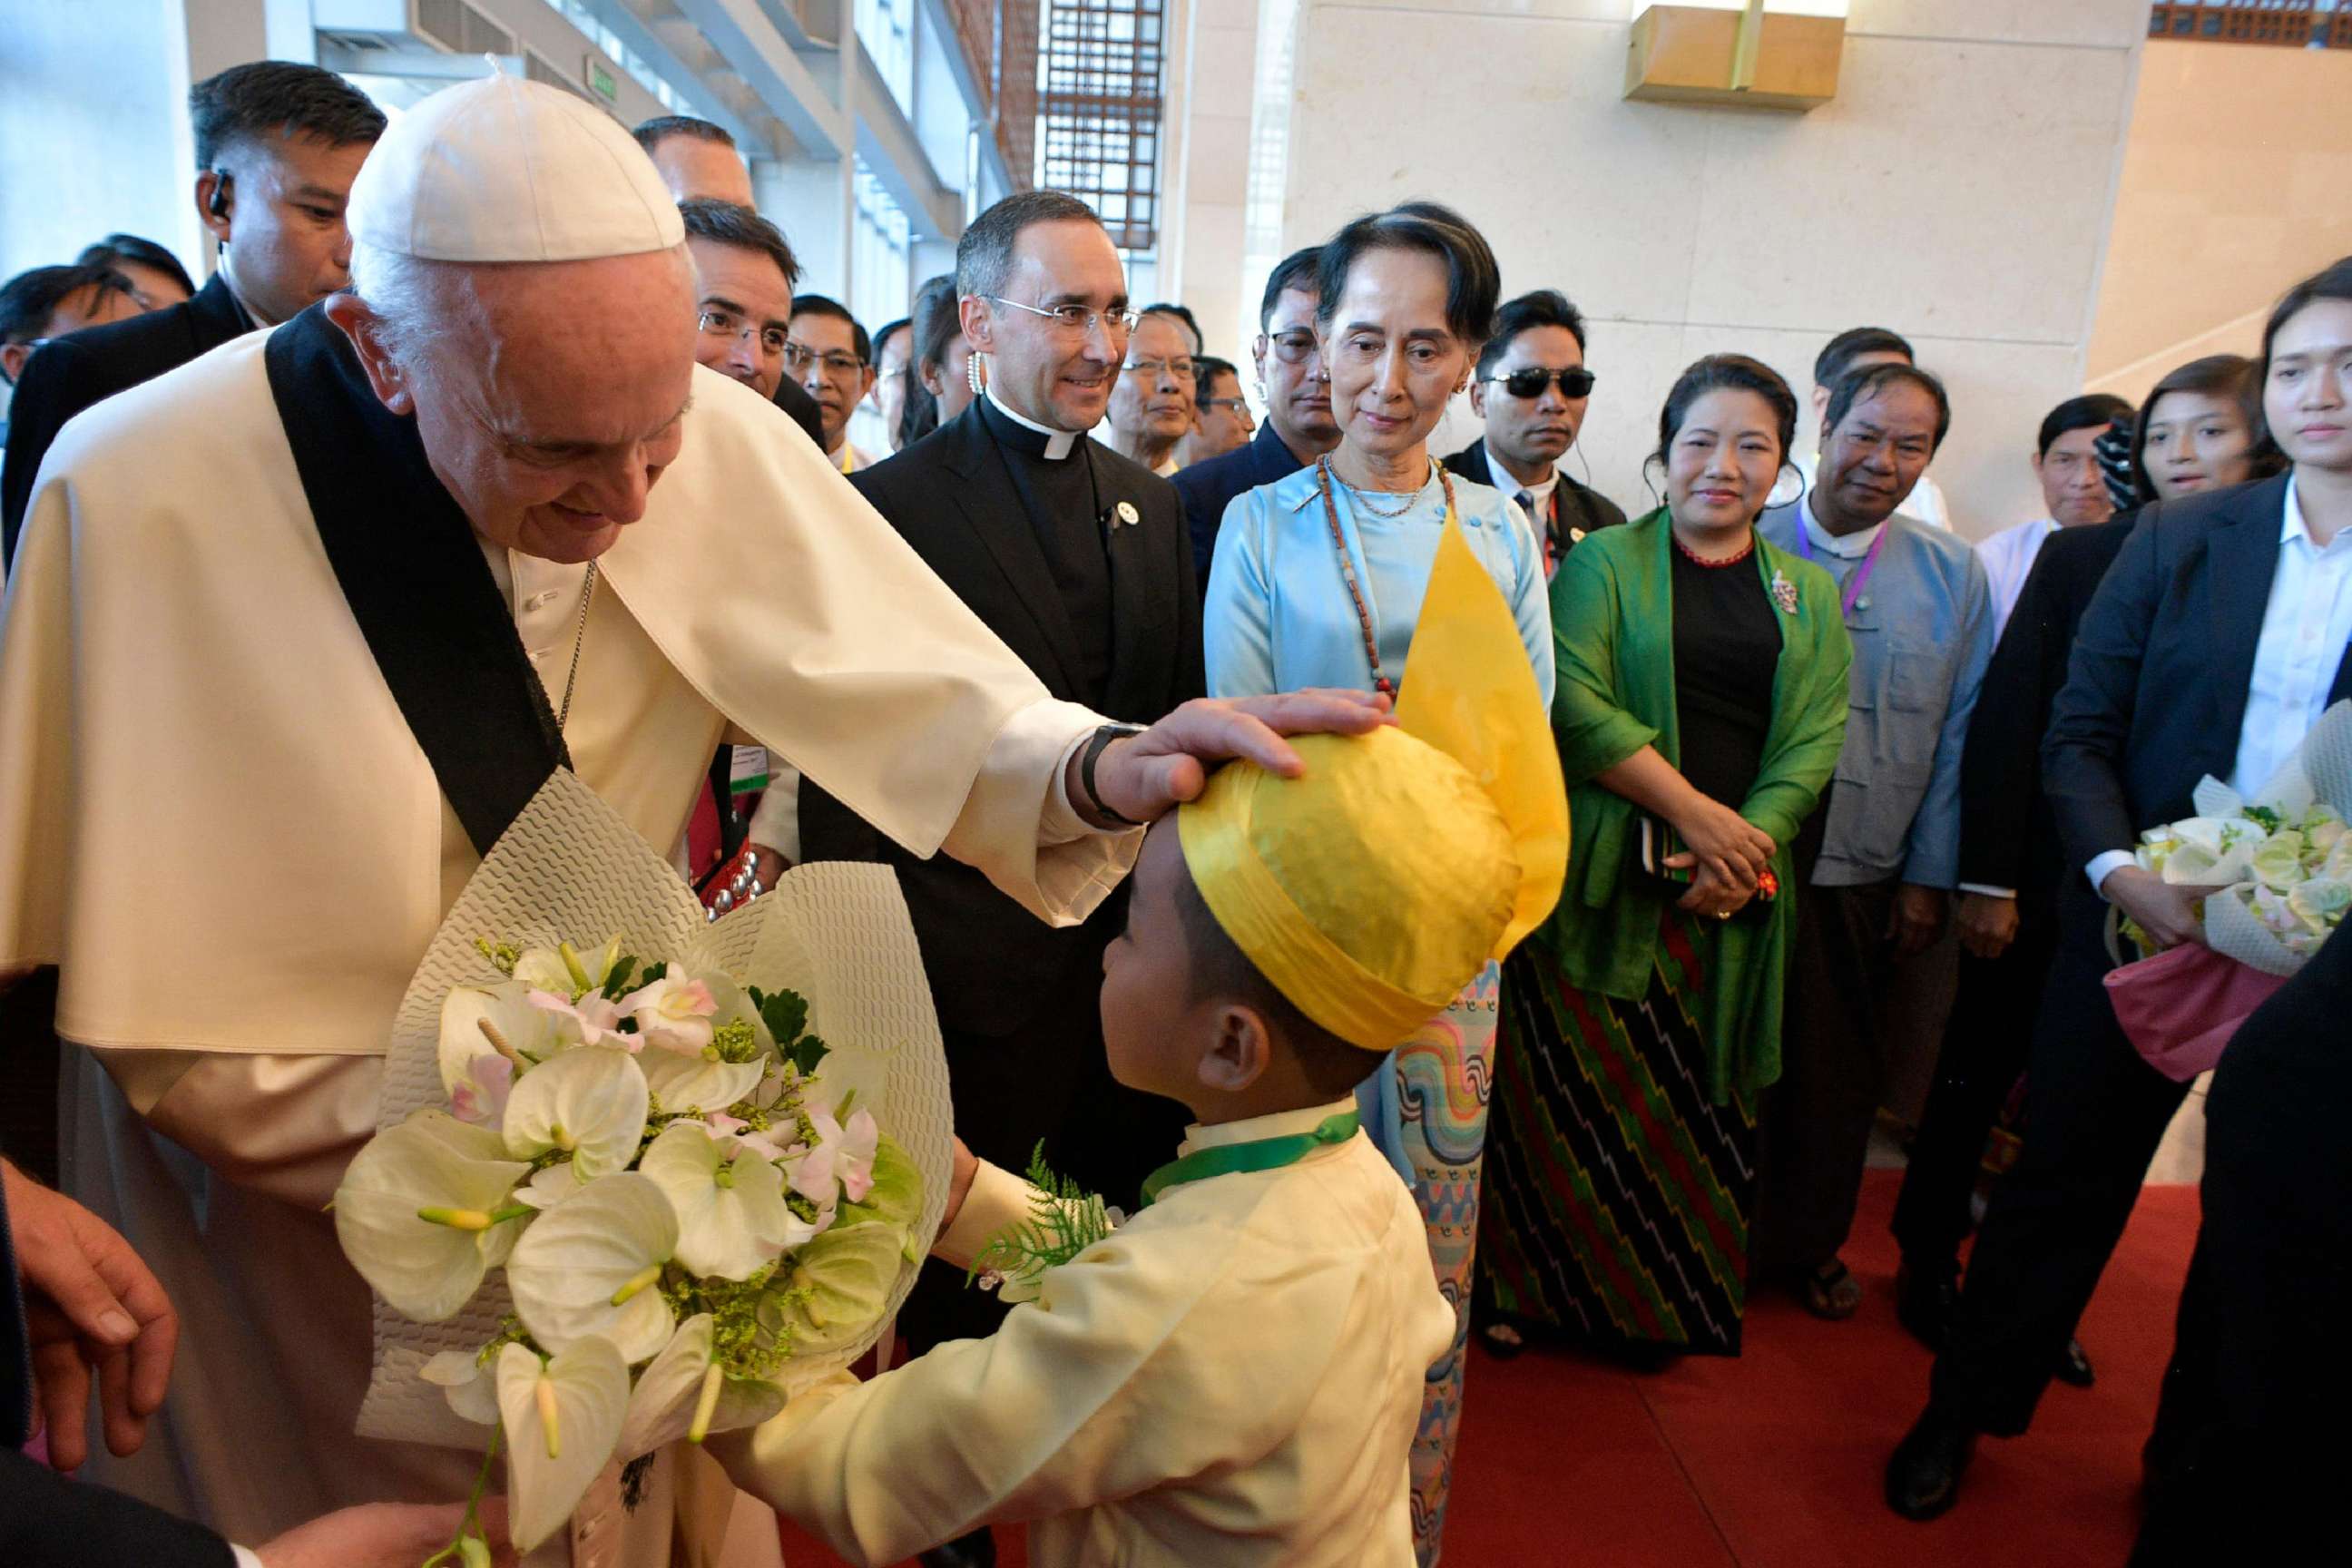 PHOTO: This handout picture taken and released by the Vatican press office (Osservatore Romano) on Nov. 28, 2017, shows Pope Francis greeting a child as Myanmar's civilian leader Aung San Suu Kyi watches during an event in Naypyidaw.
